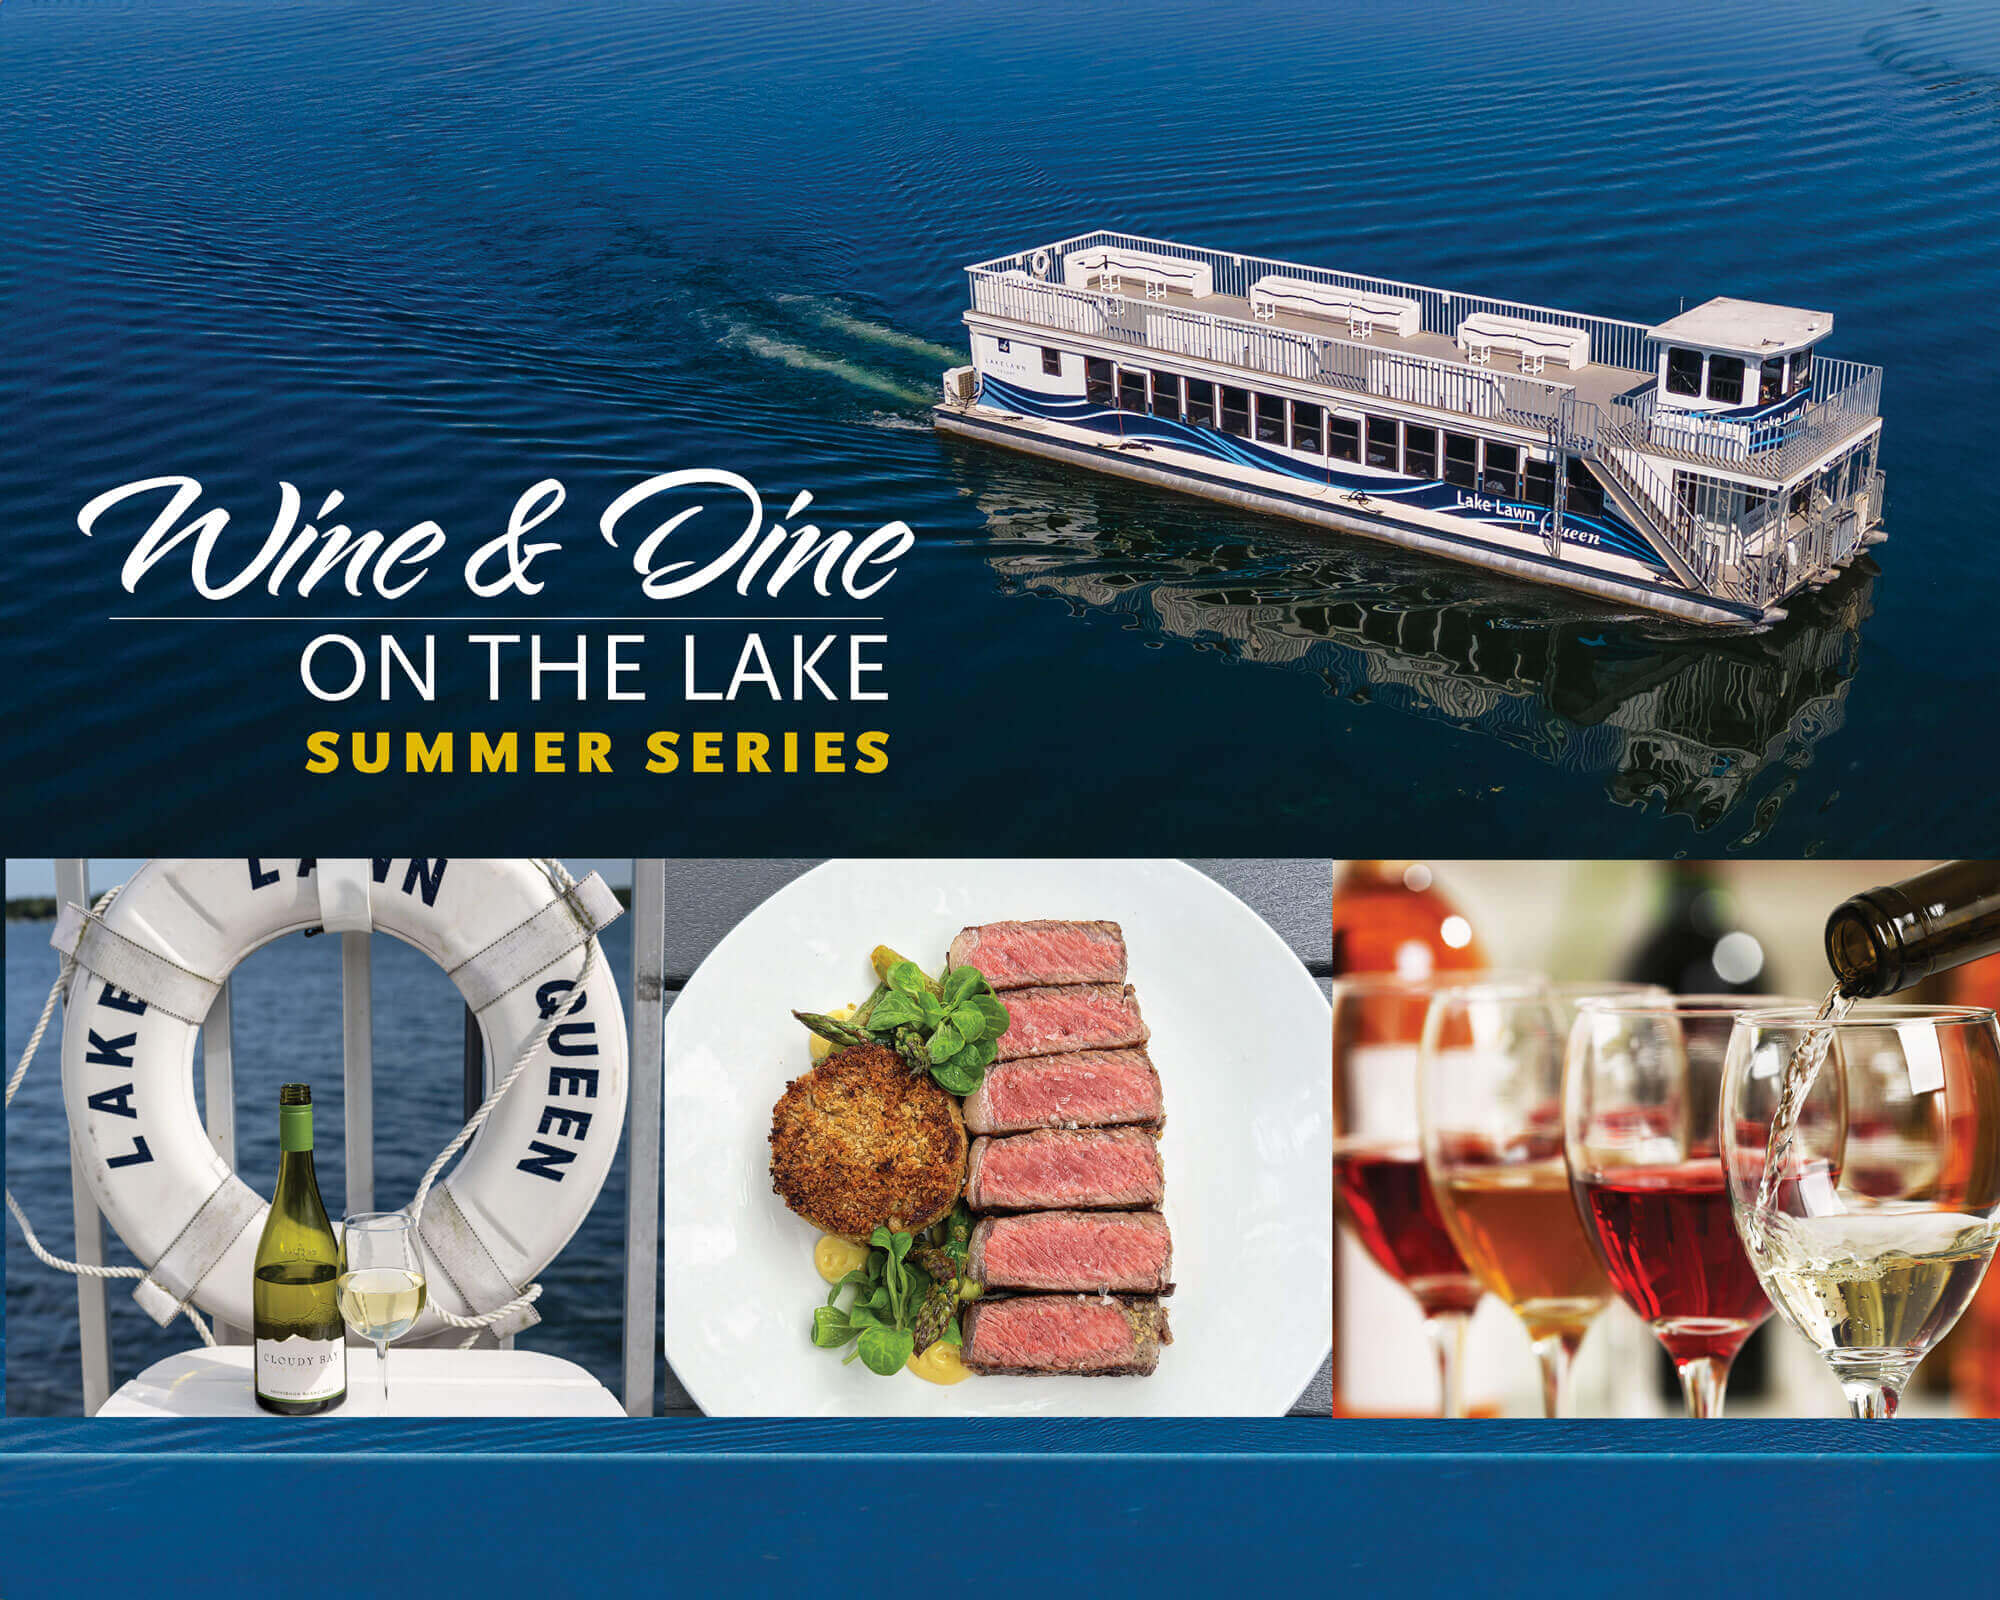 Wine and dine on the lake series